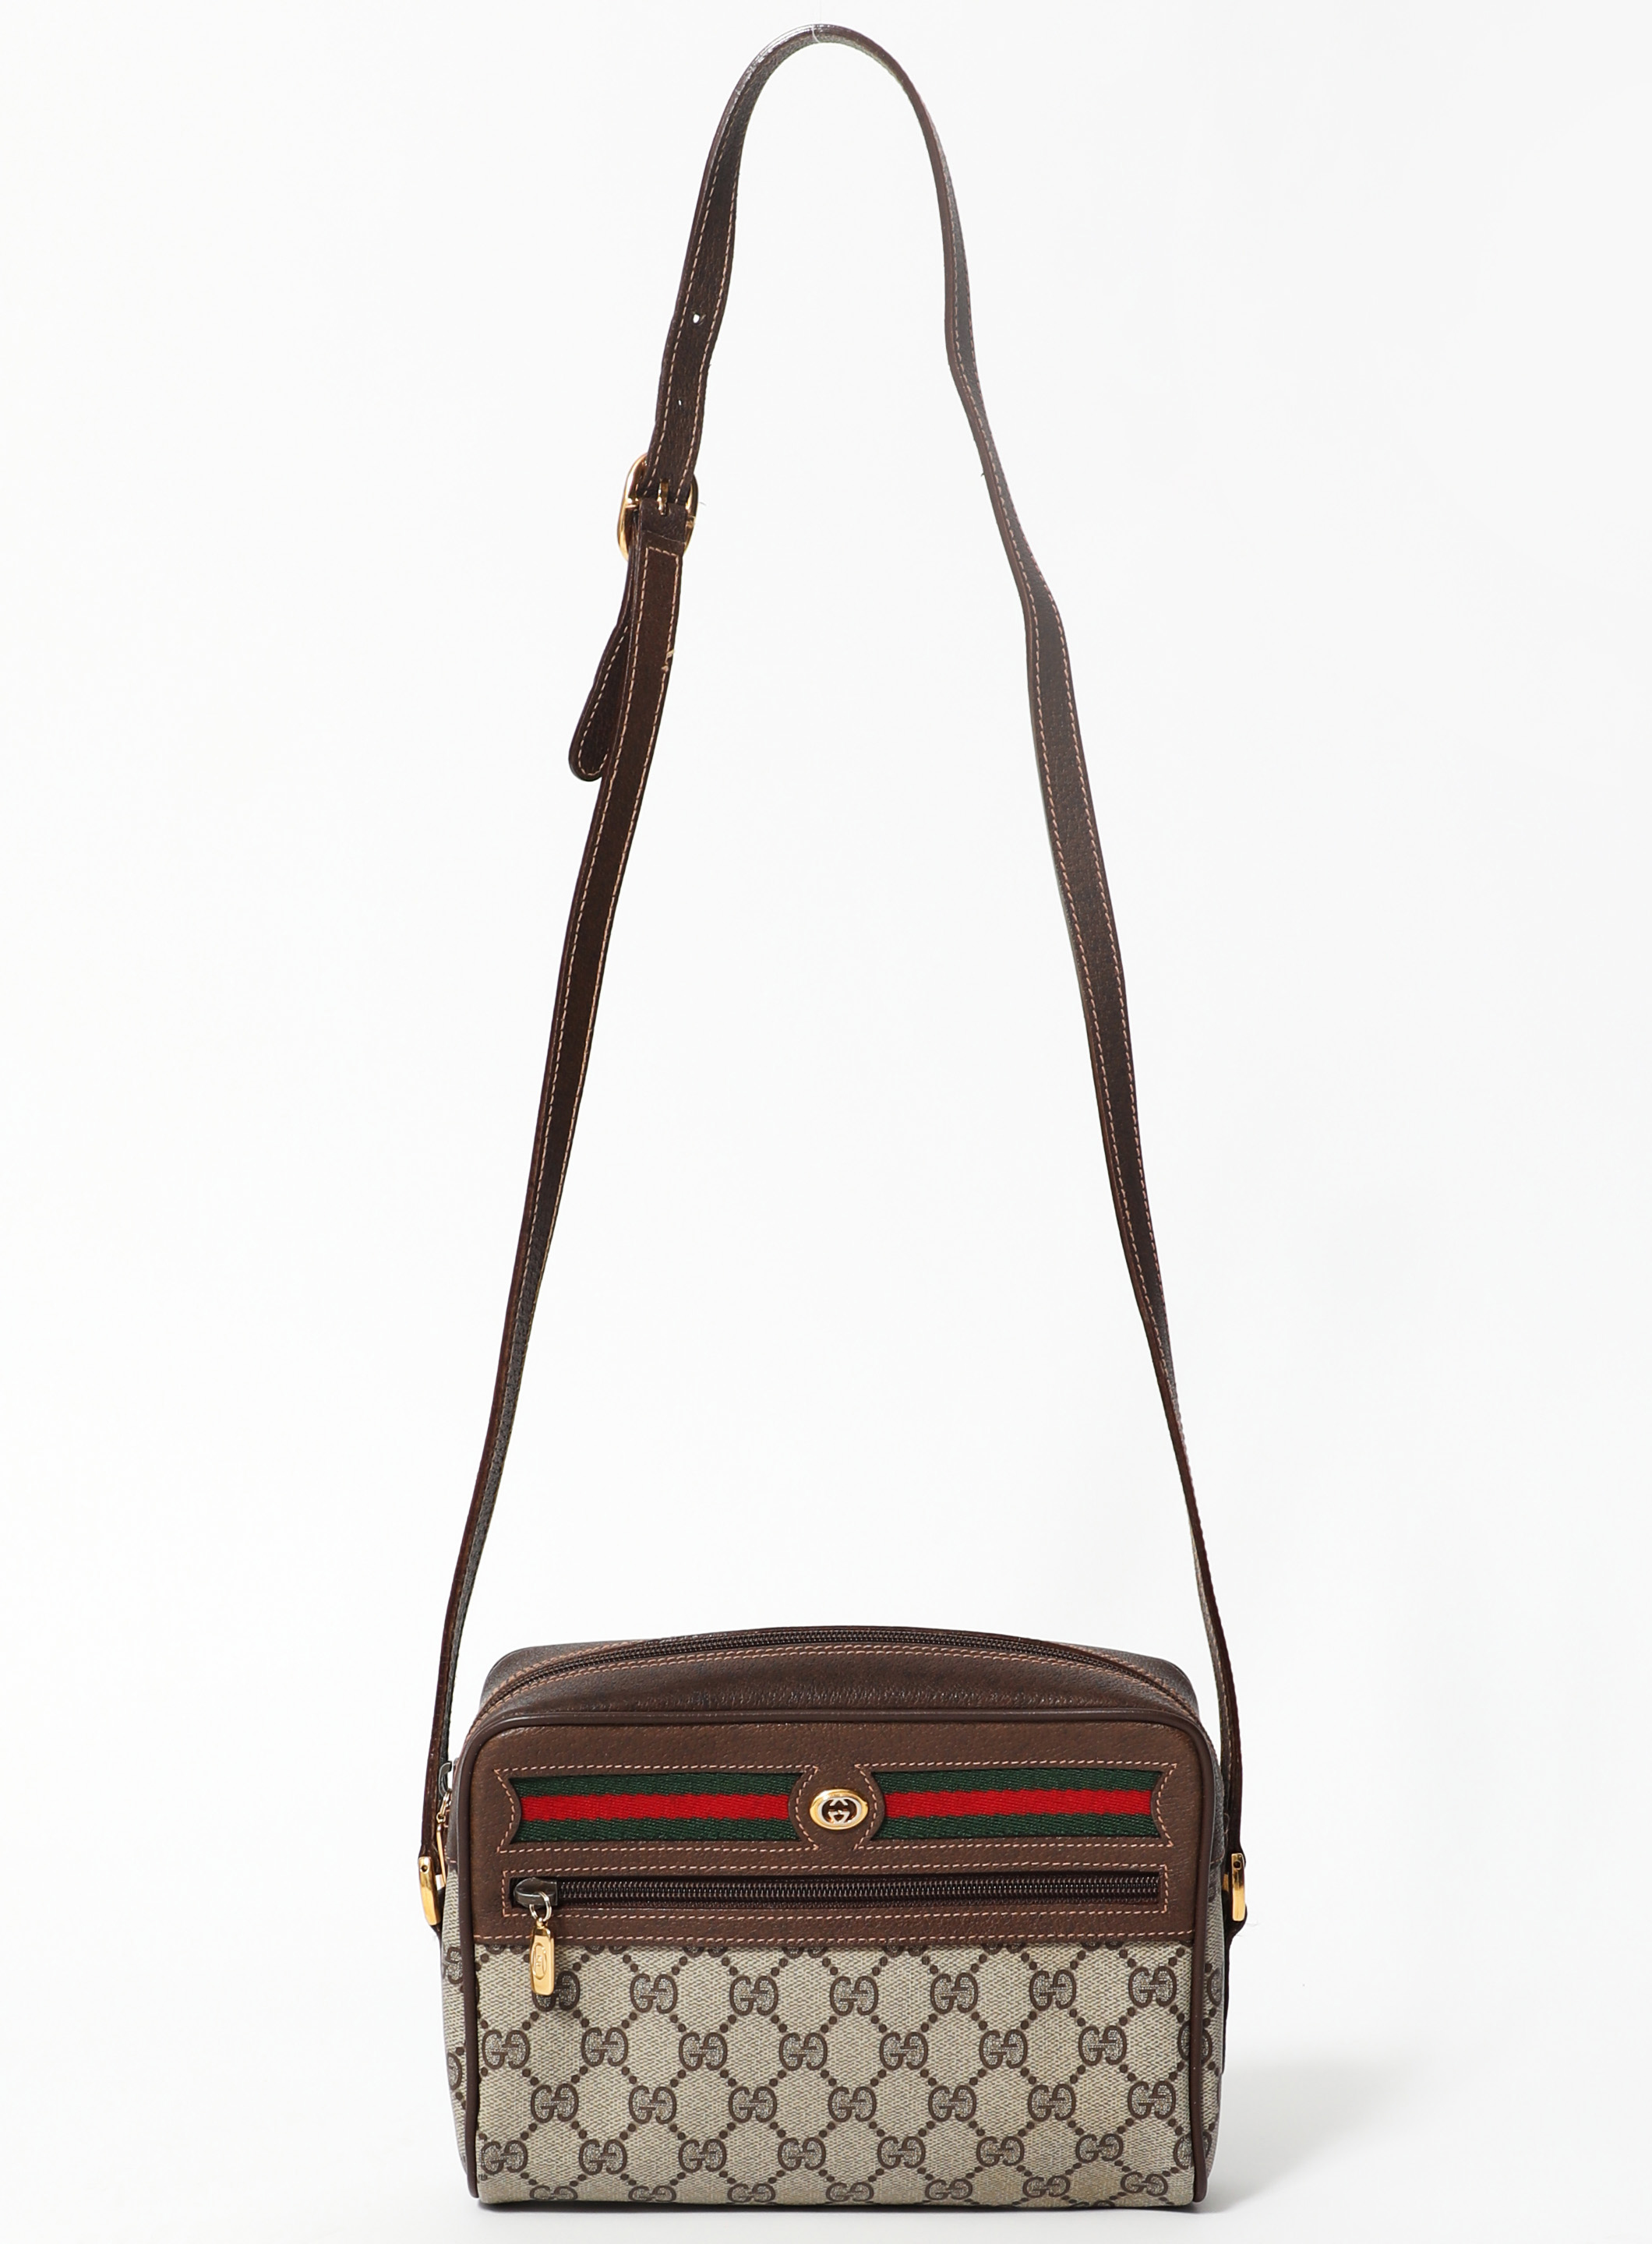 Buy the AUTHENTICATED Vintage Gucci Accessory Collection Italy Leather Trim  Crossbody Bag